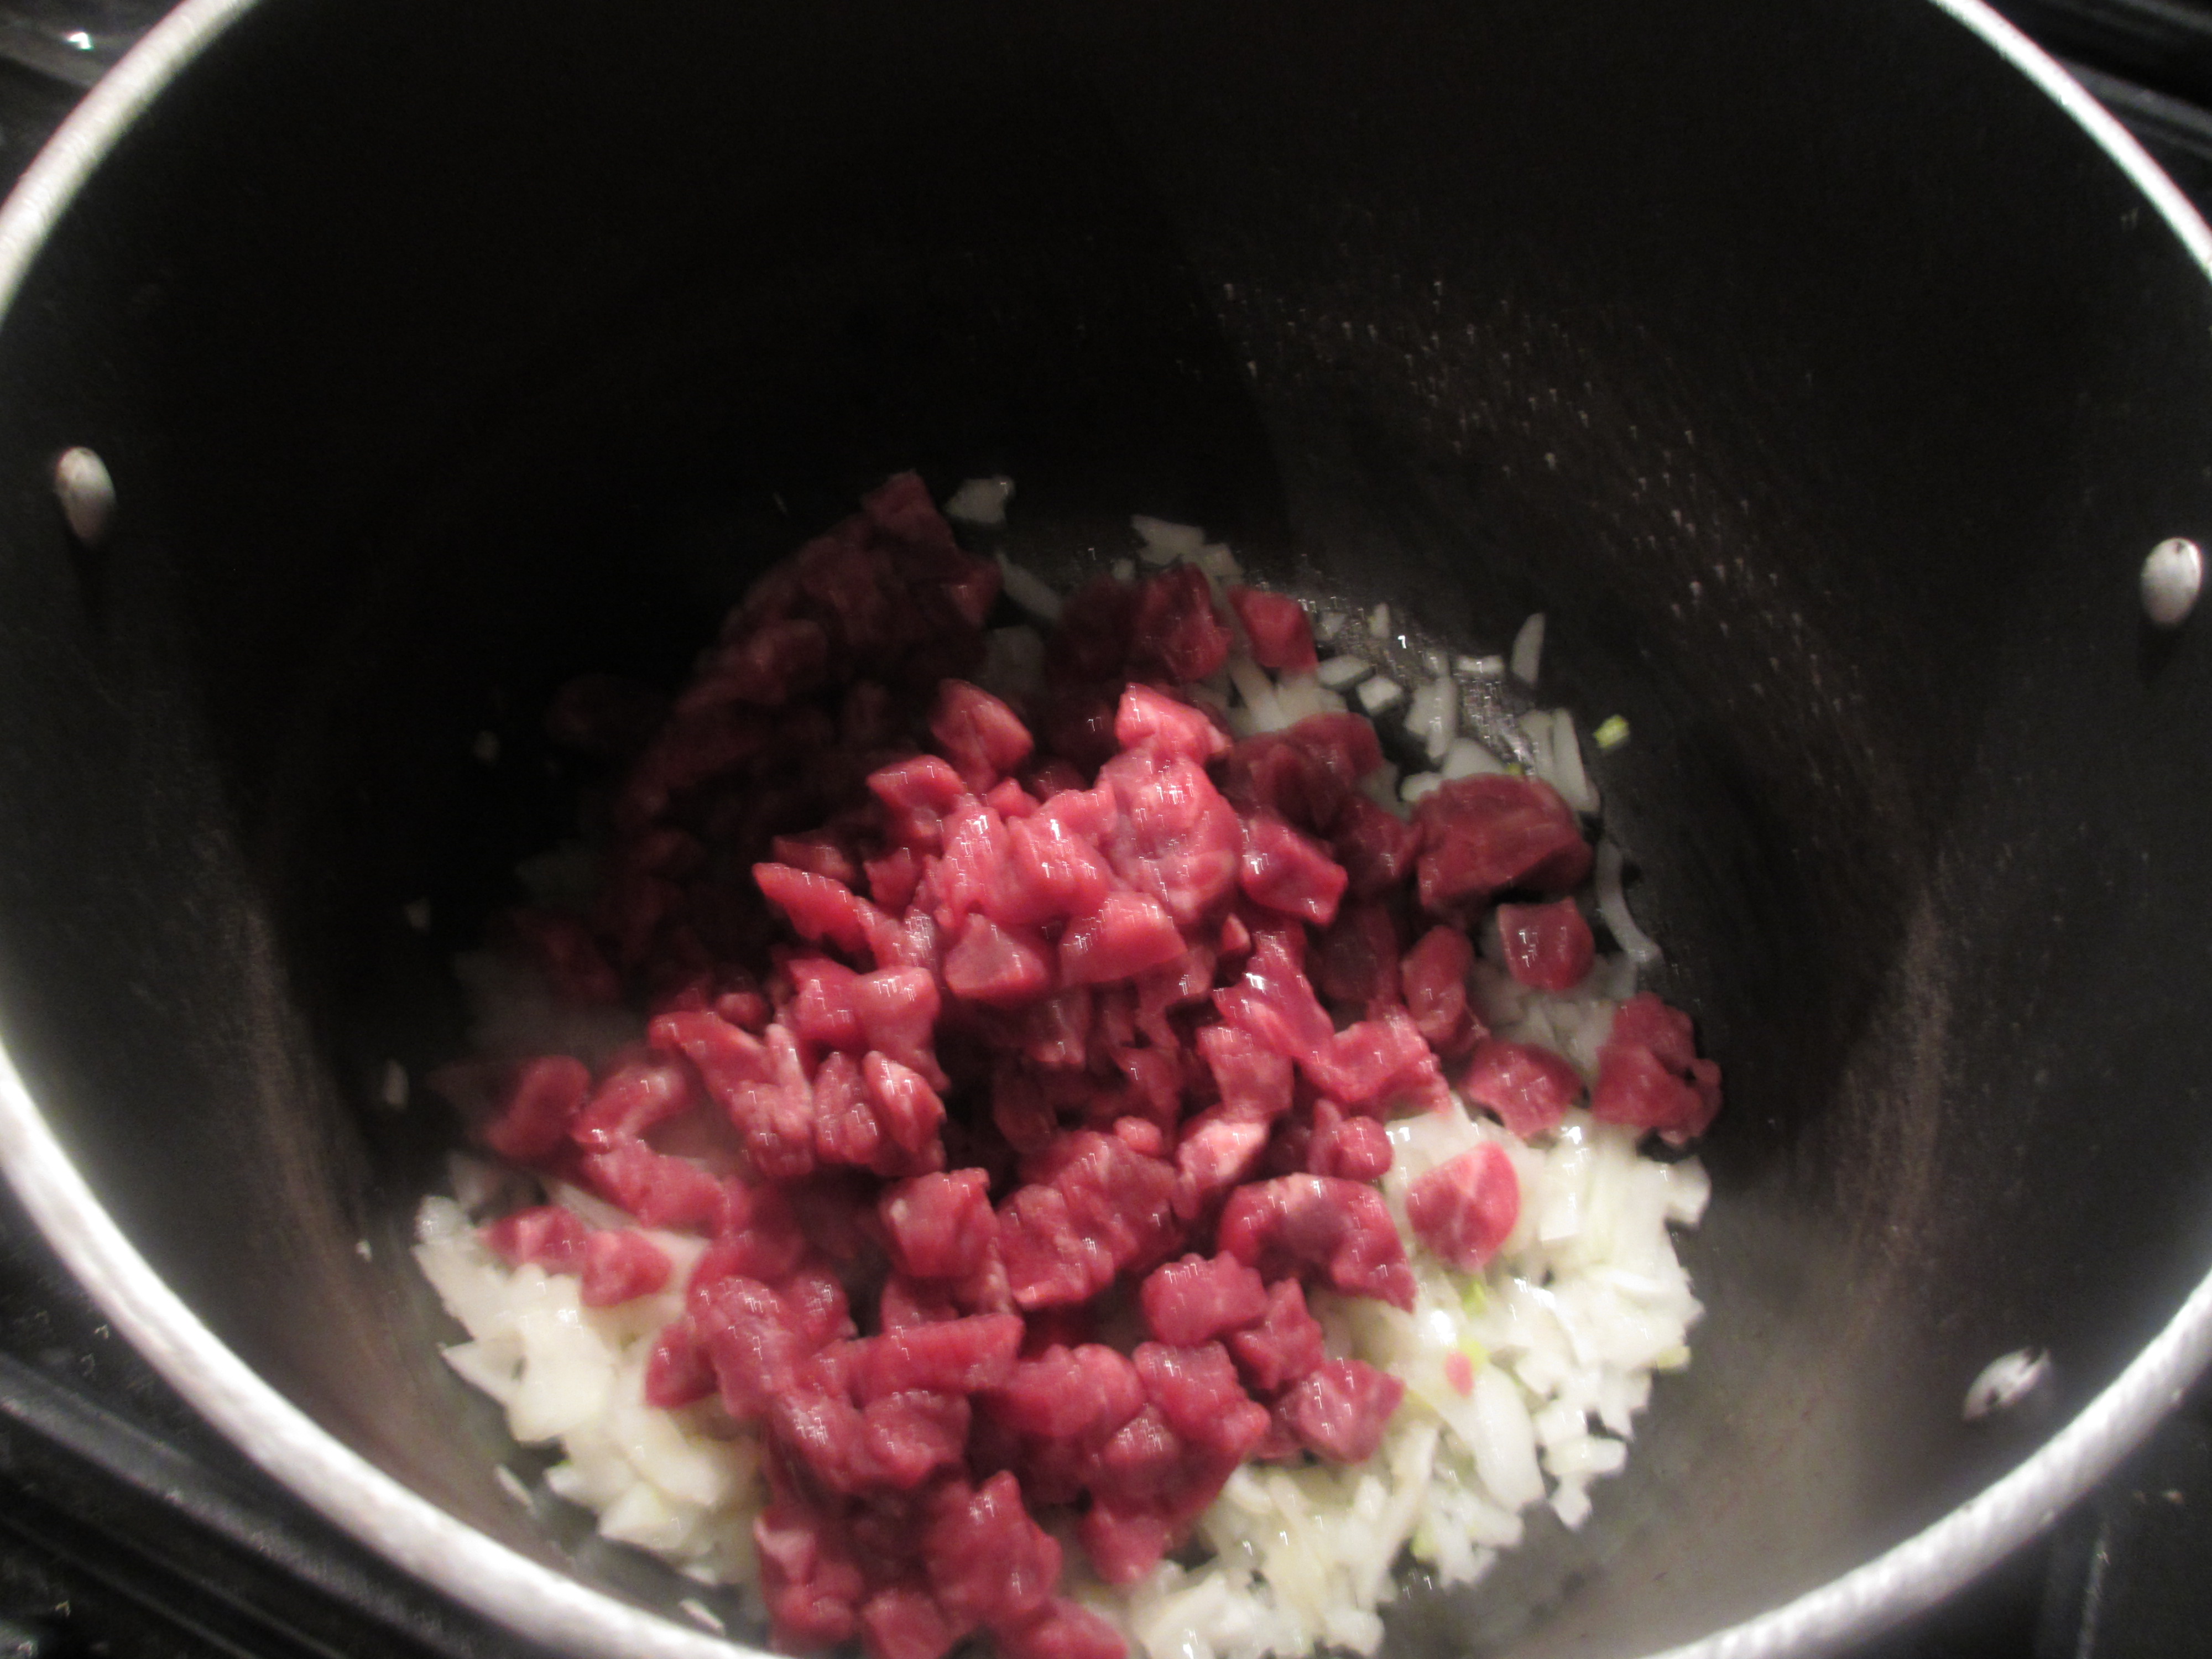 Chopped onions and beef